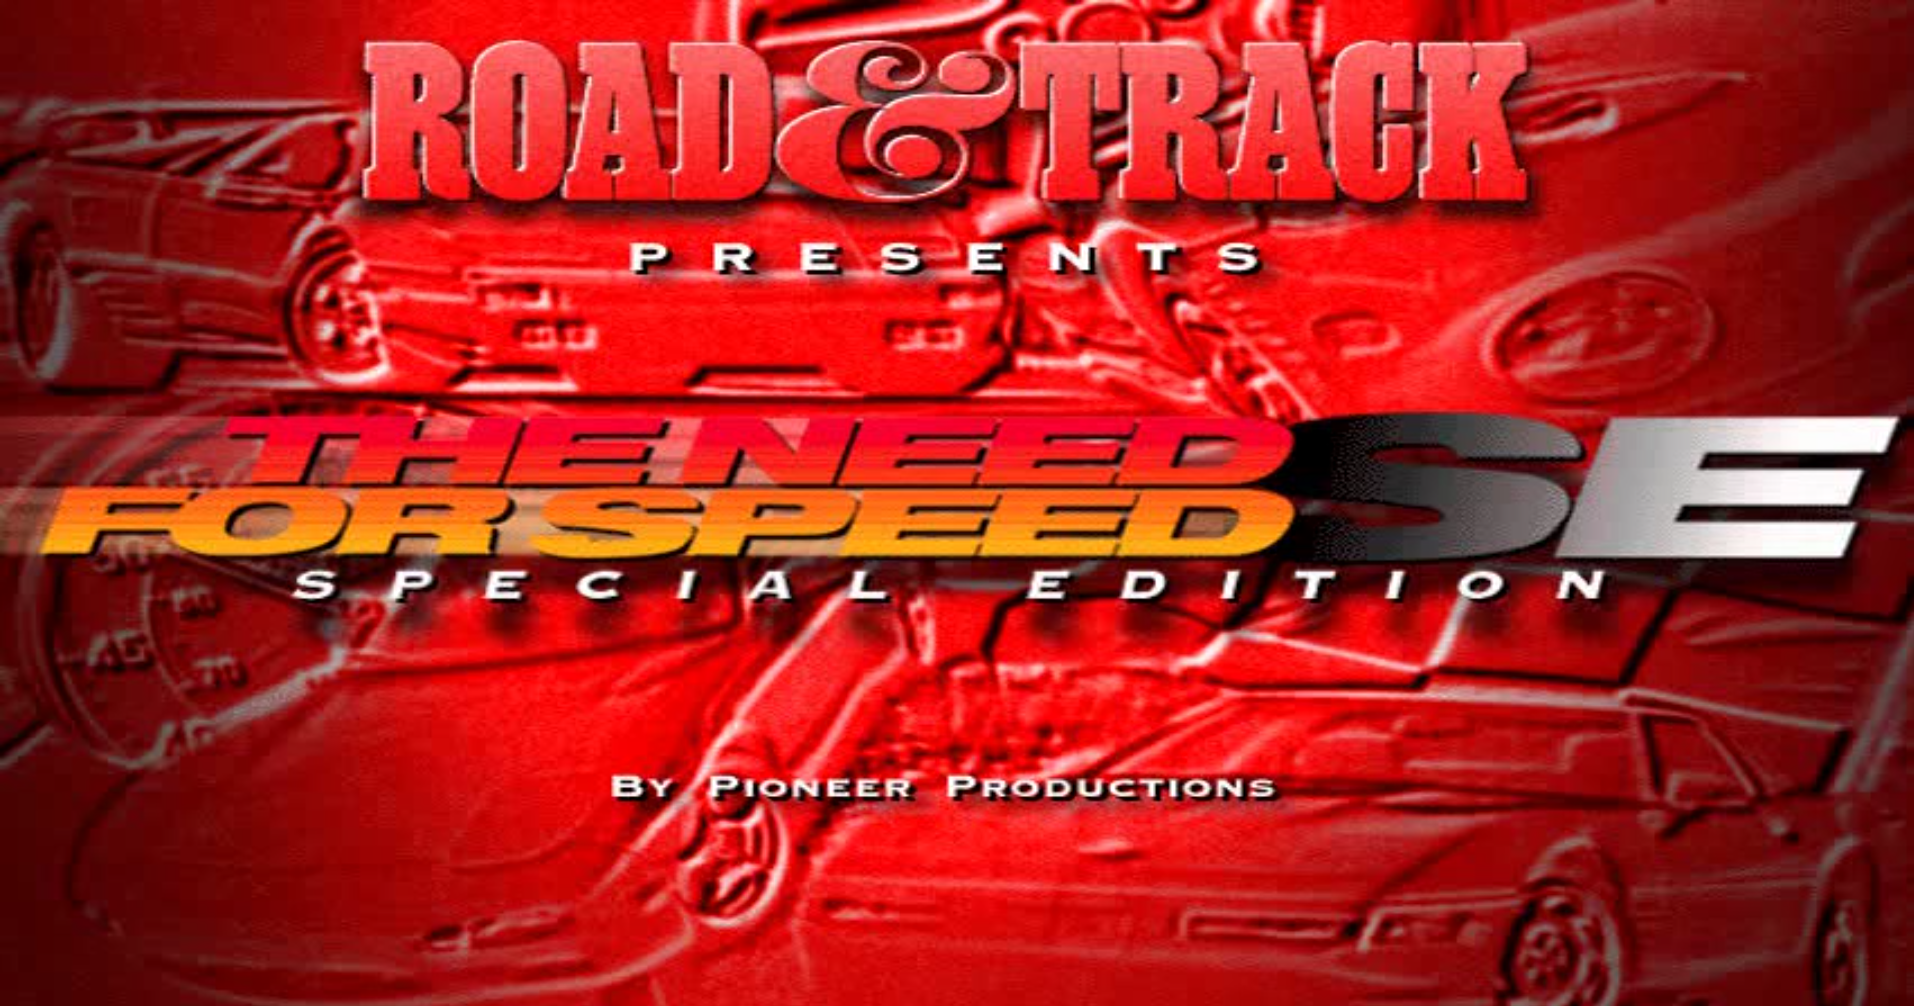 The Need for Speed: Special Edition